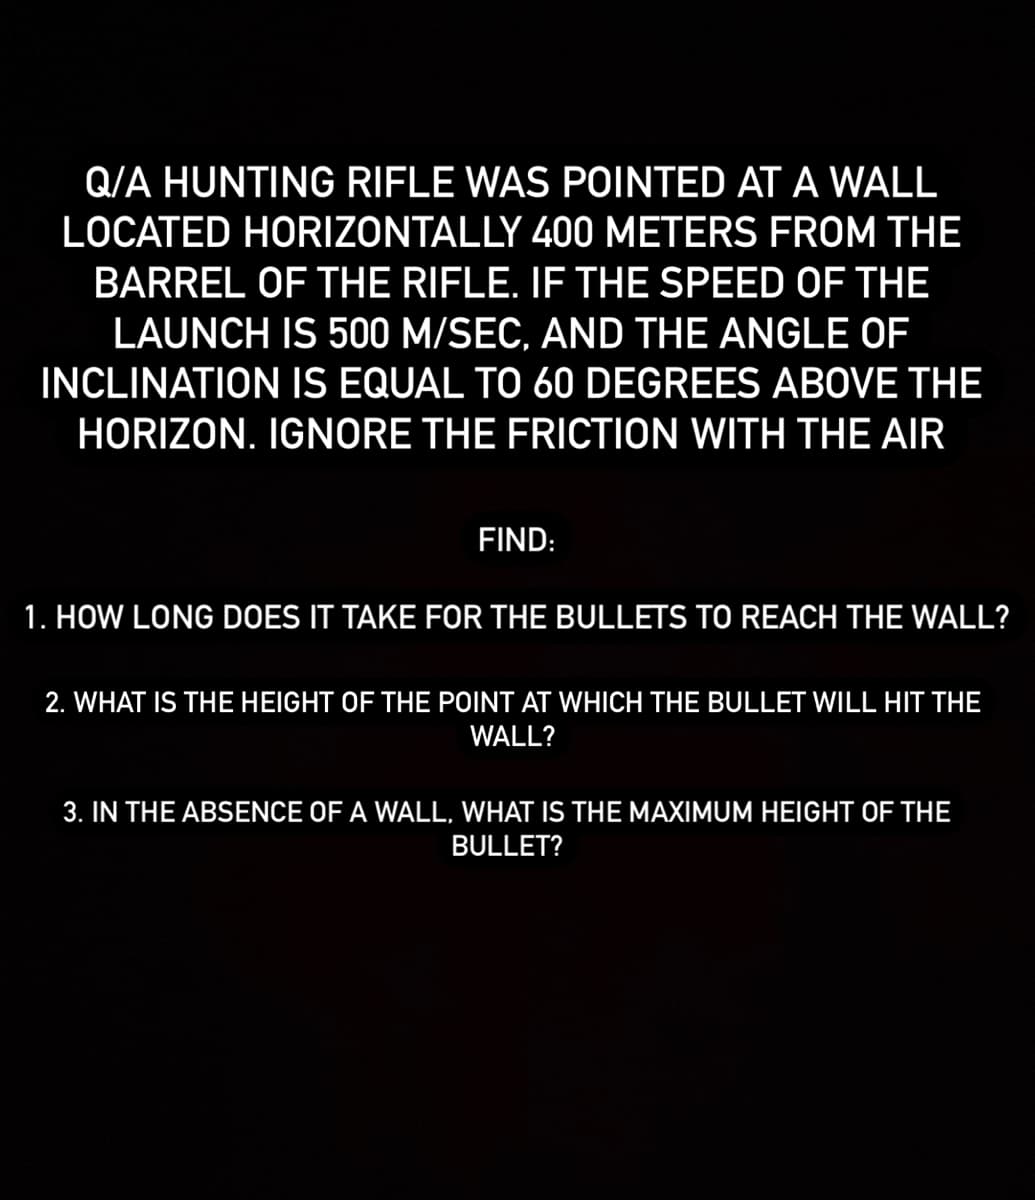 Q/A HUNTING RIFLE WAS POINTED AT A WALL
LOCATED HORIZONTALLY 400 METERS FROM THE
BARREL OF THE RIFLE. IF THE SPEED OF THE
LAUNCH IS 500 M/SEC, AND THE ANGLE OF
INCLINATION IS EQUAL TO 60 DEGREES ABOVE THE
HORIZON. IGNORE THE FRICTION WITH THE AIR
FIND:
1. HOW LONG DOES IT TAKE FOR THE BULLETS TO REACH THE WALL?
2. WHAT IS THE HEIGHT OF THE POINT AT WHICH THE BULLET WILL HIT THE
WALL?
3. IN THE ABSENCE OF A WALL, WHAT IS THE MAXIMUM HEIGHT OF THE
BULLET?
